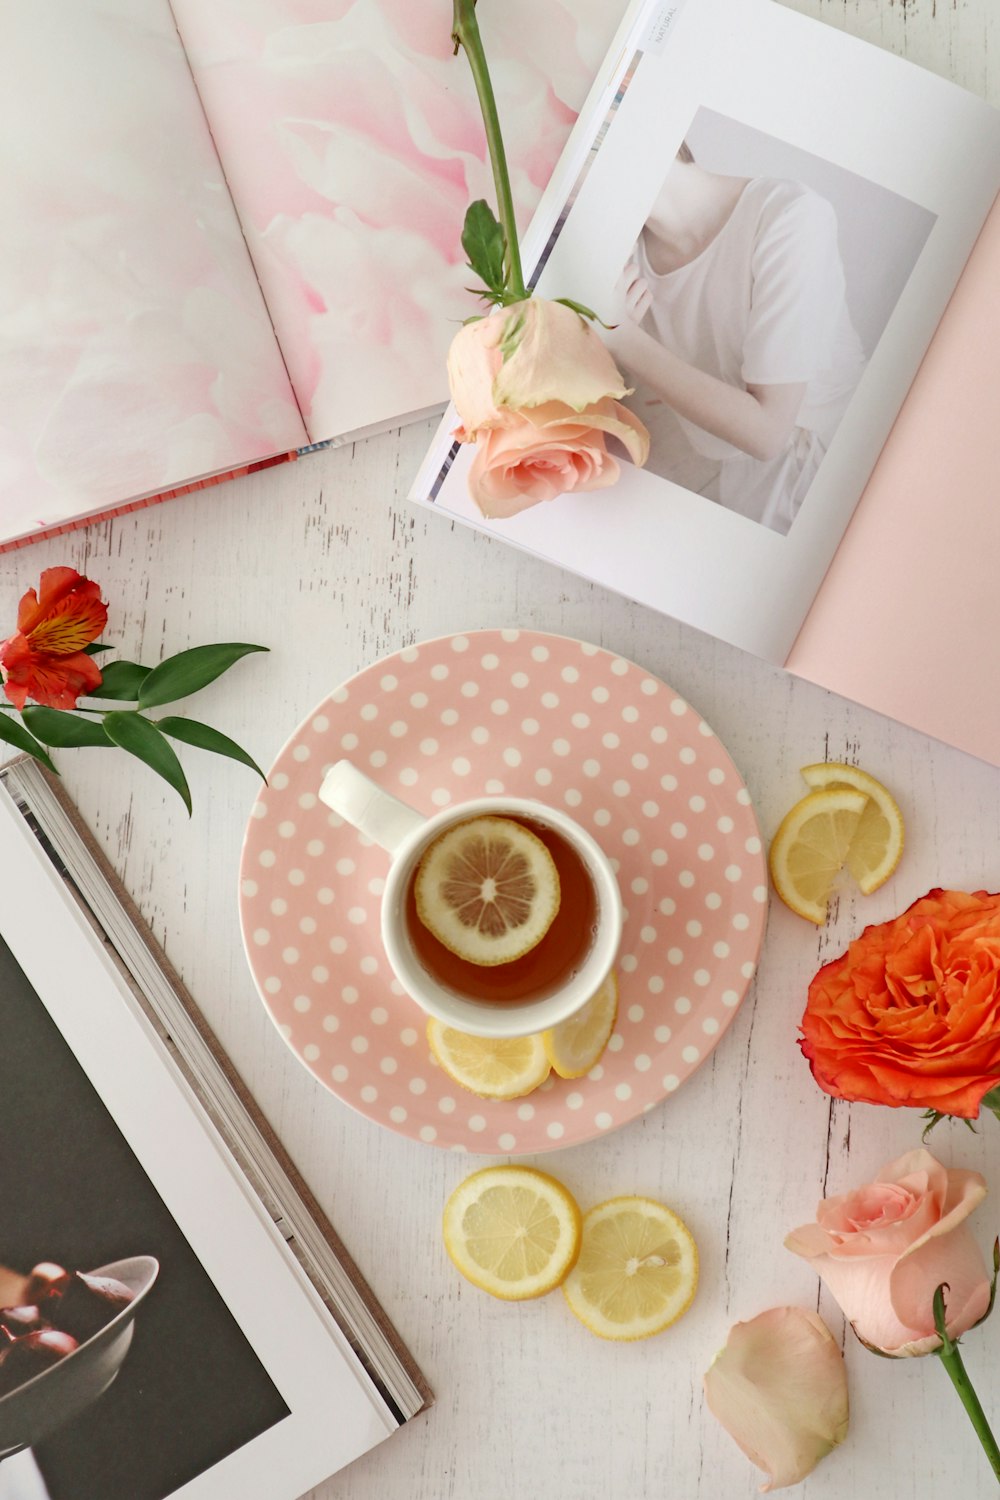 pink rose beside yellow and white polka dot ceramic cup with saucer